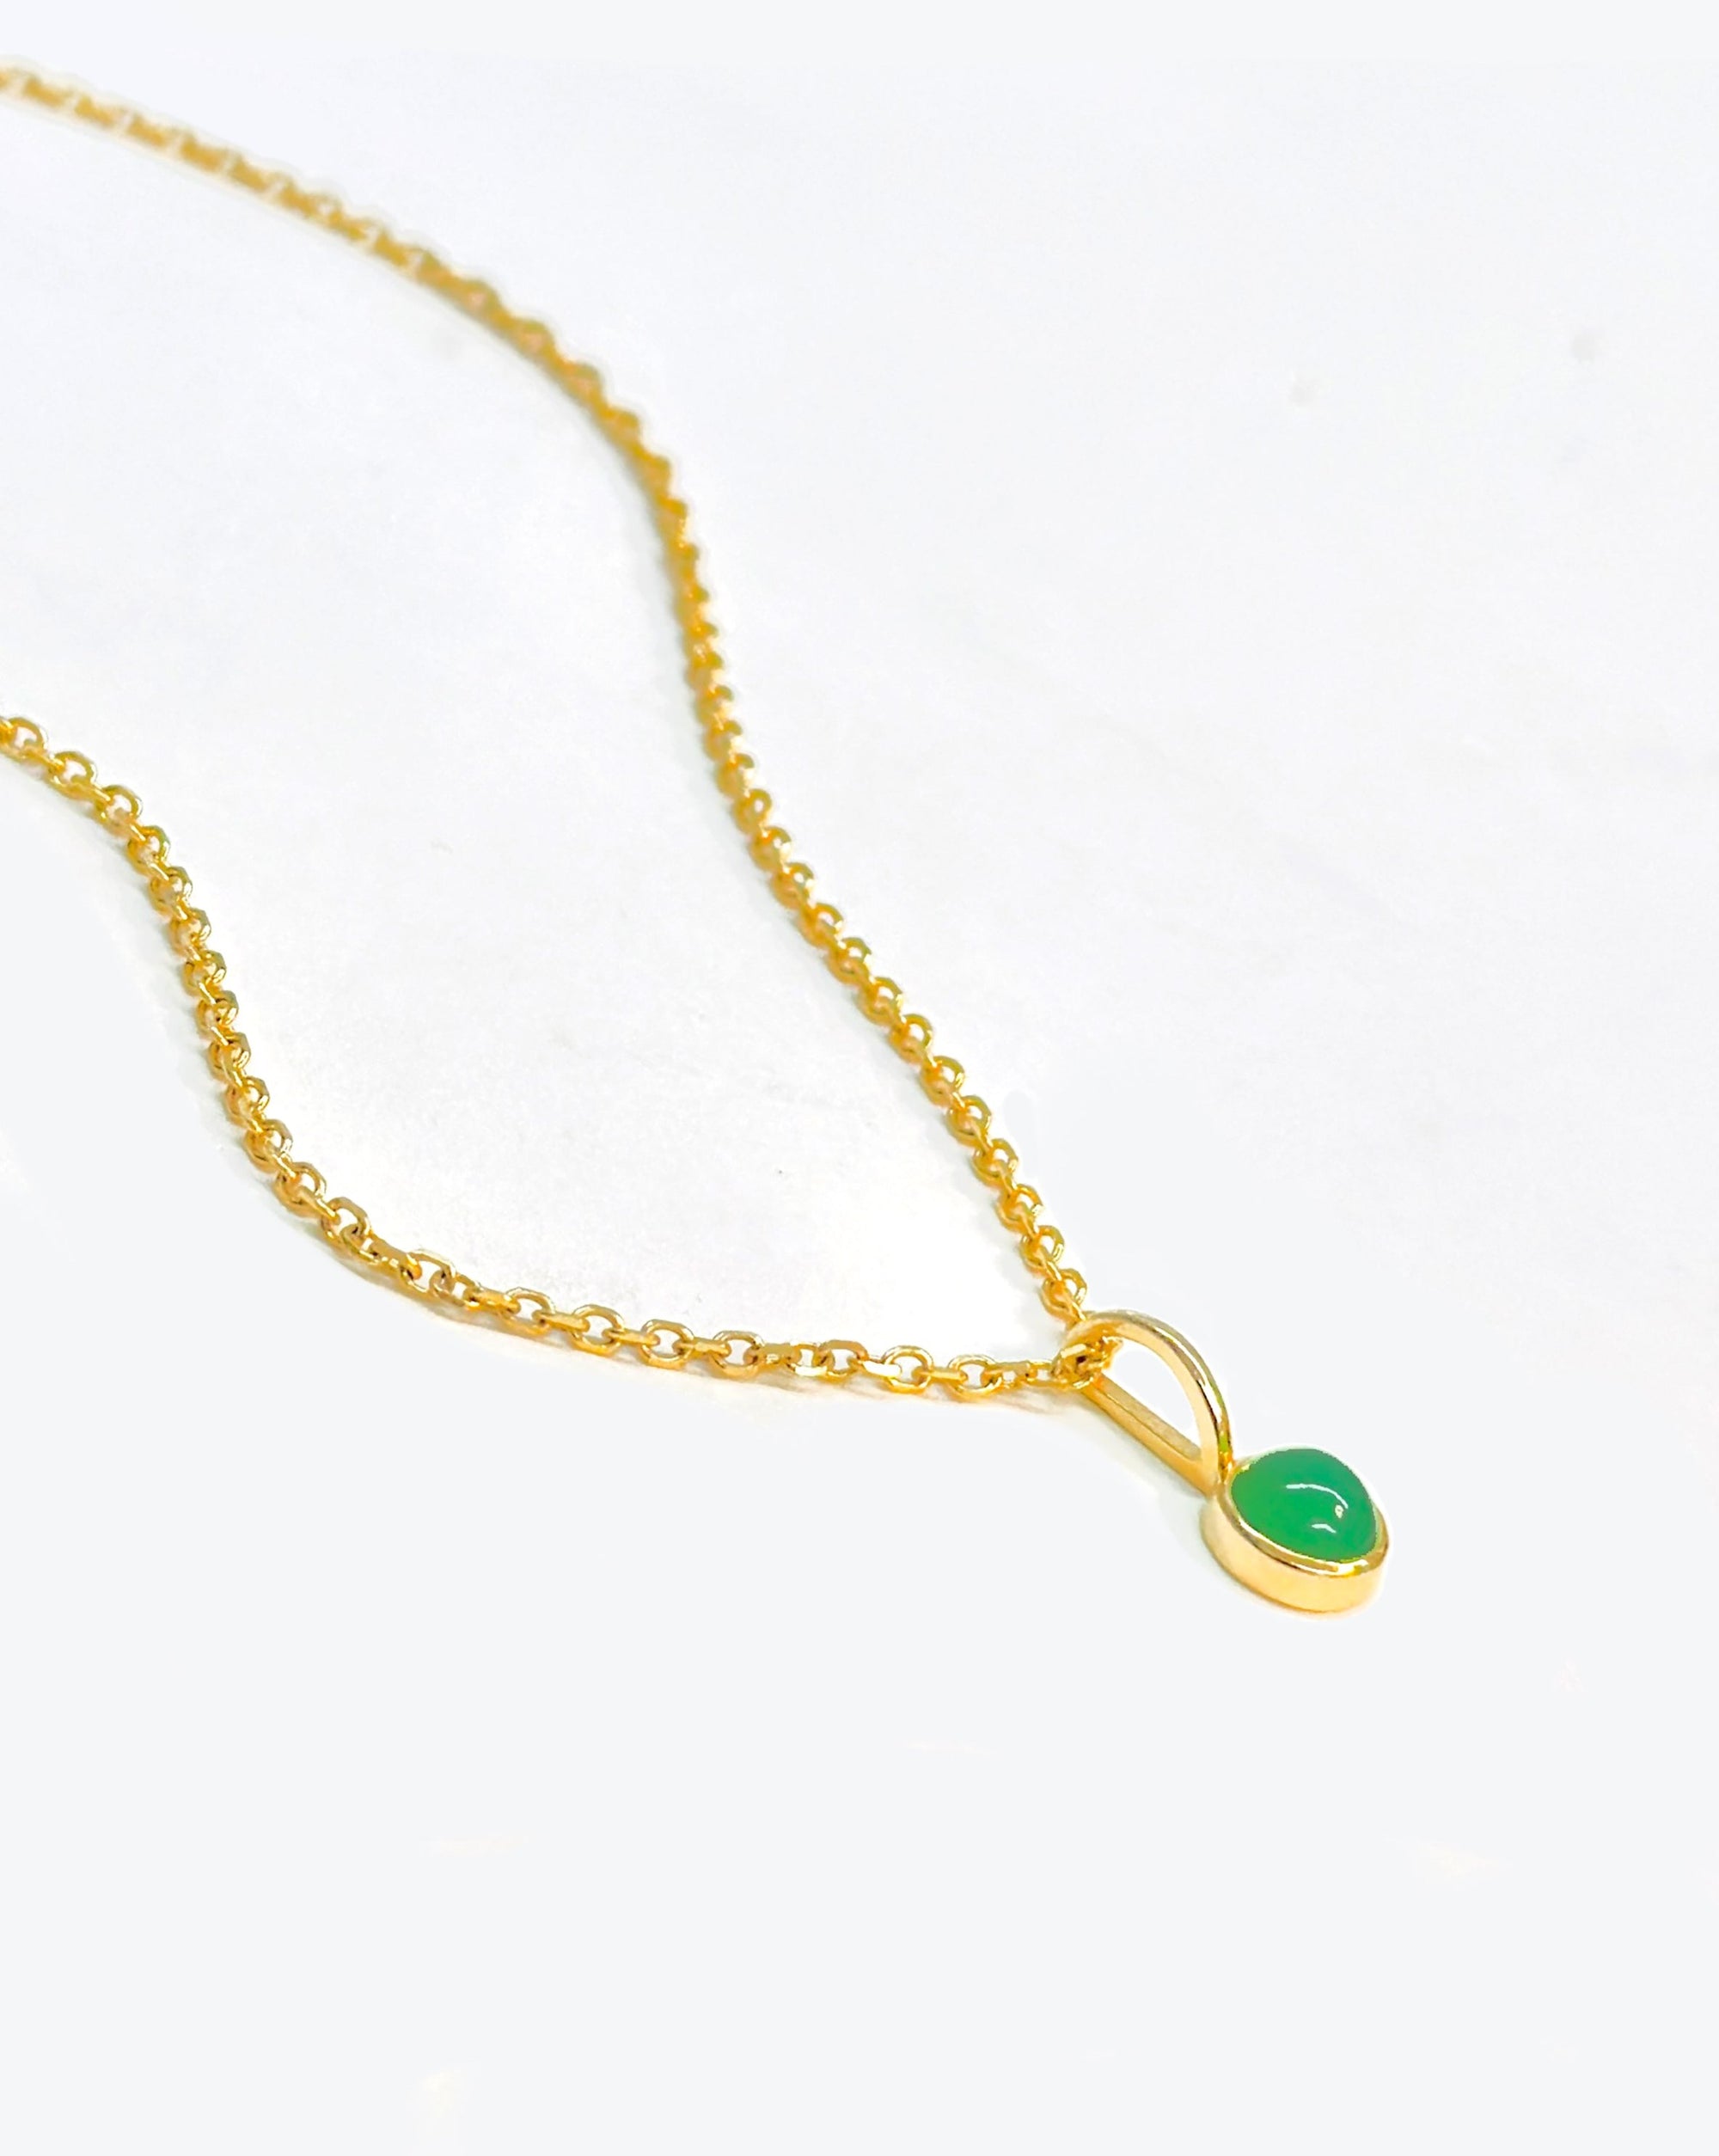 bright 14k gold chain necklace featuring a radiant green gemstone set in gold